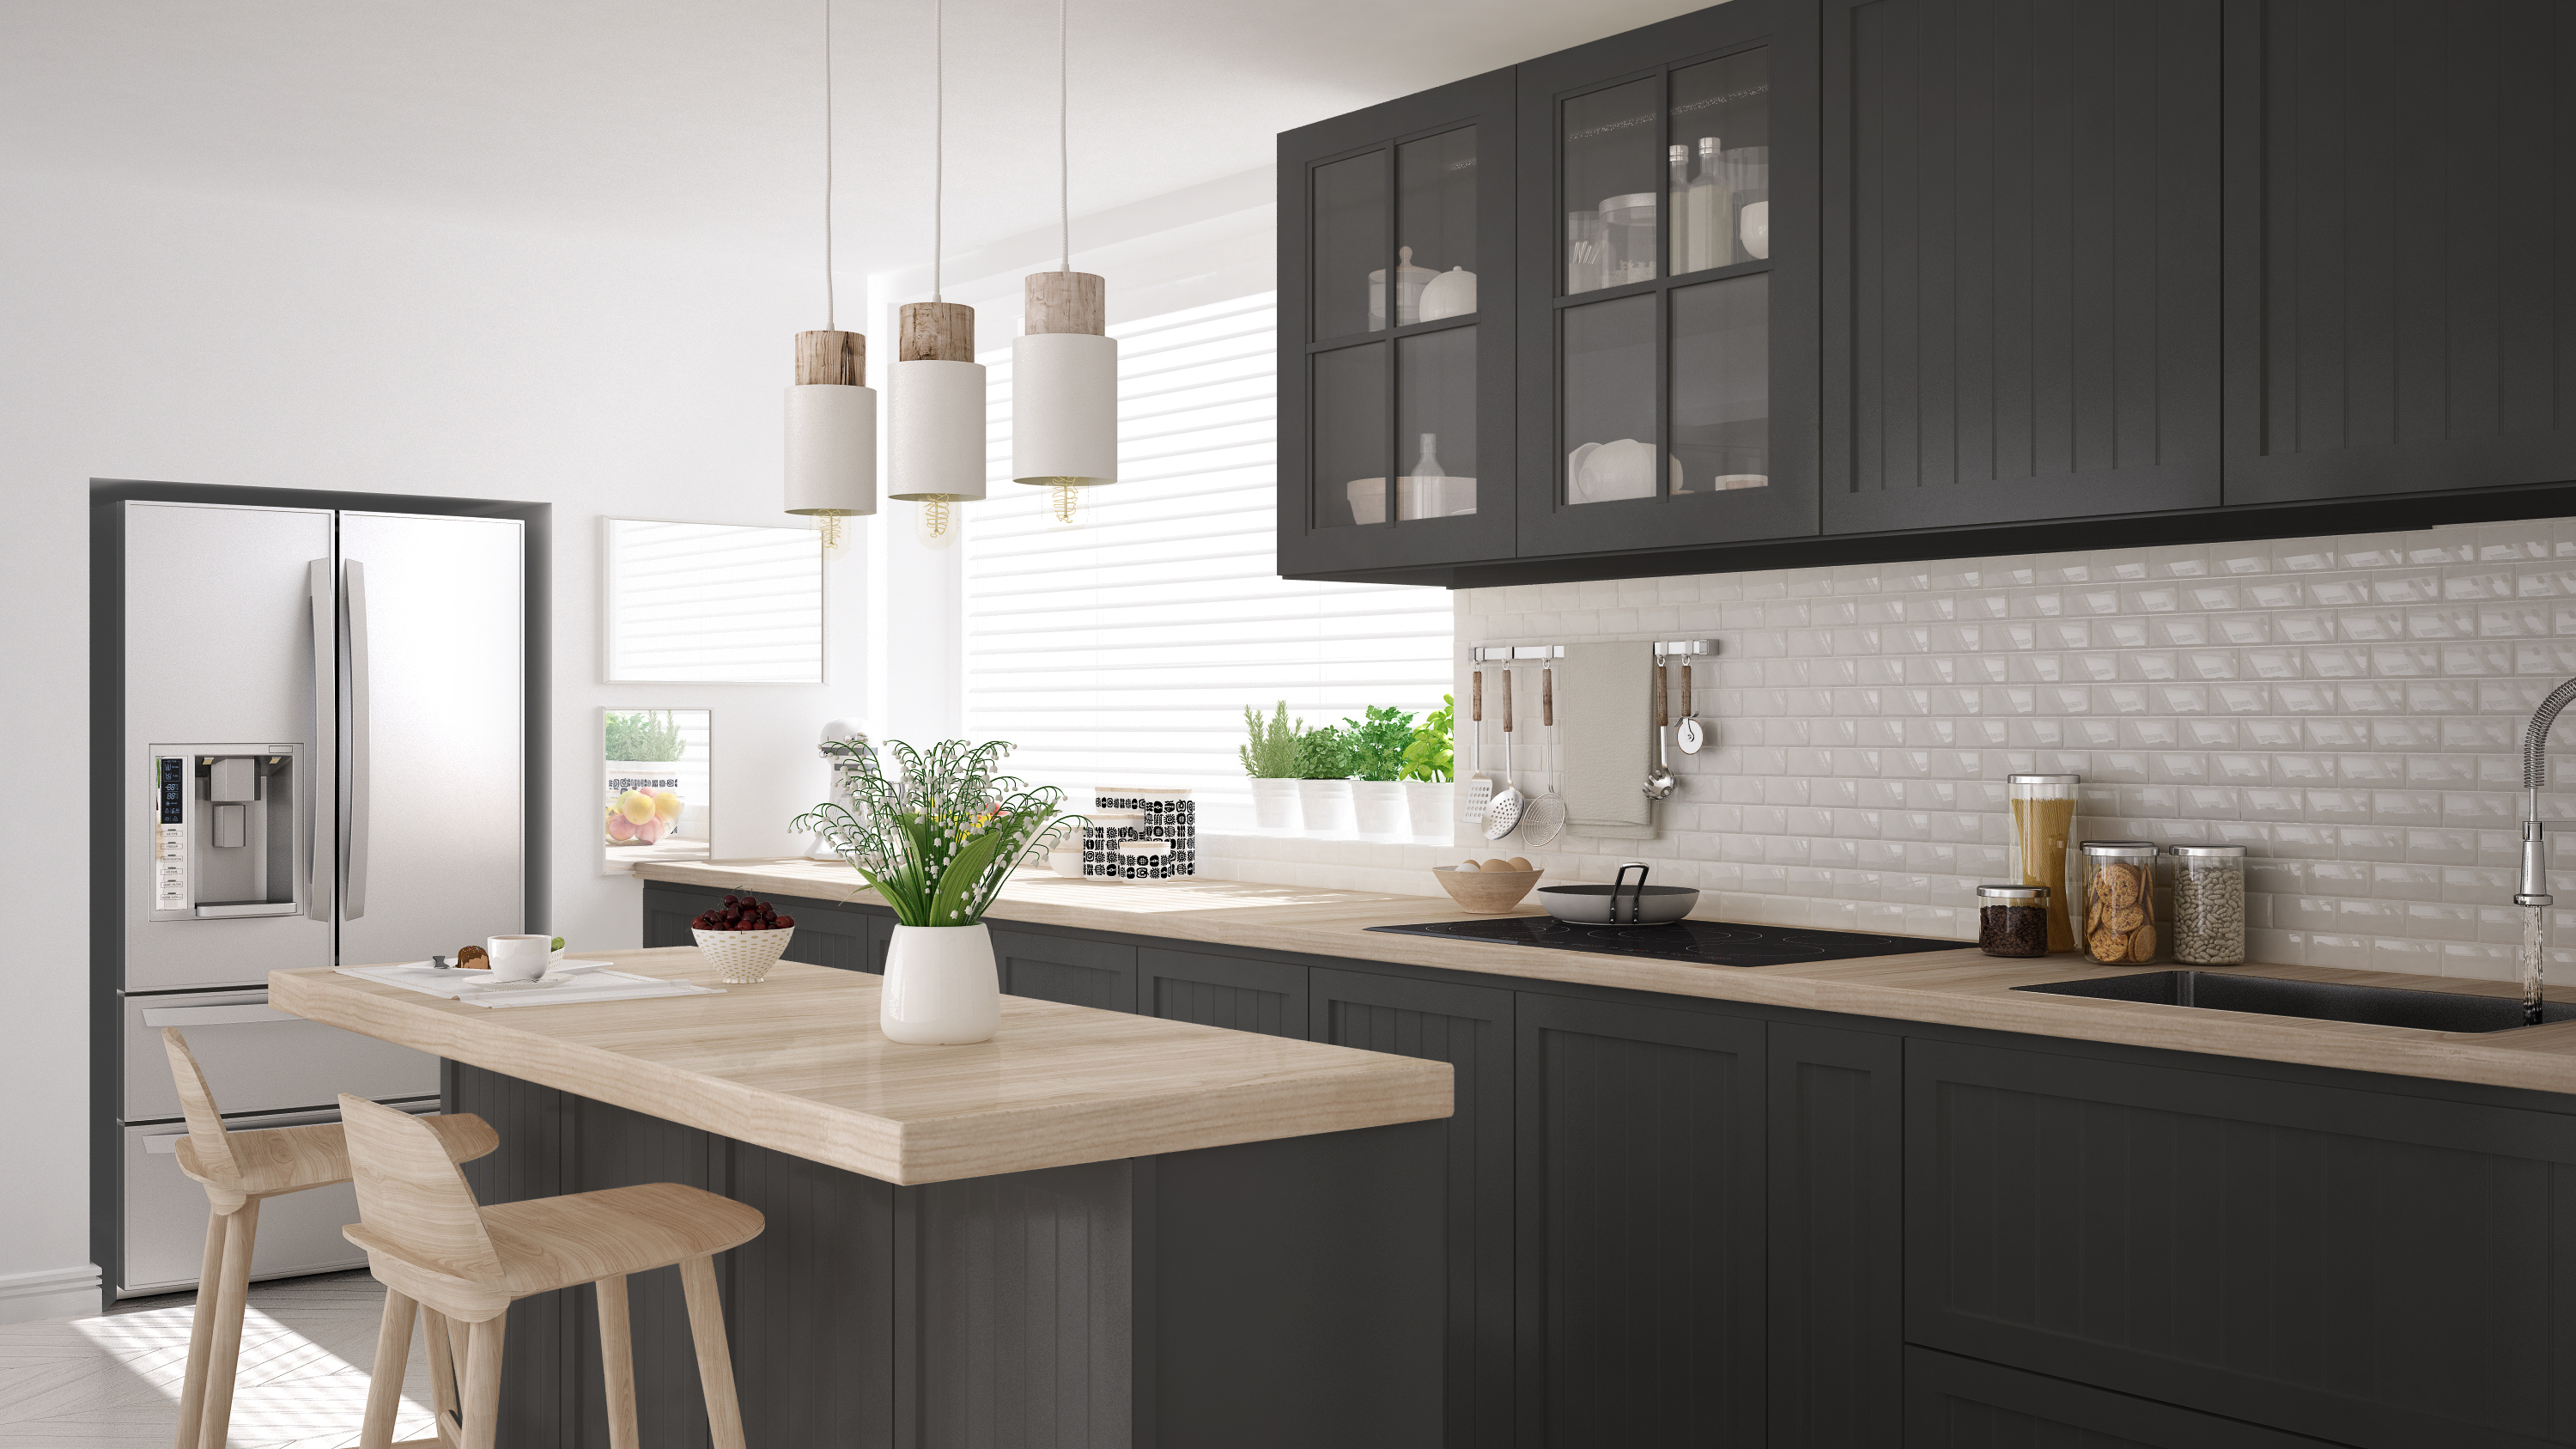 traditional shaker kitchen cabinets with wooden worktops